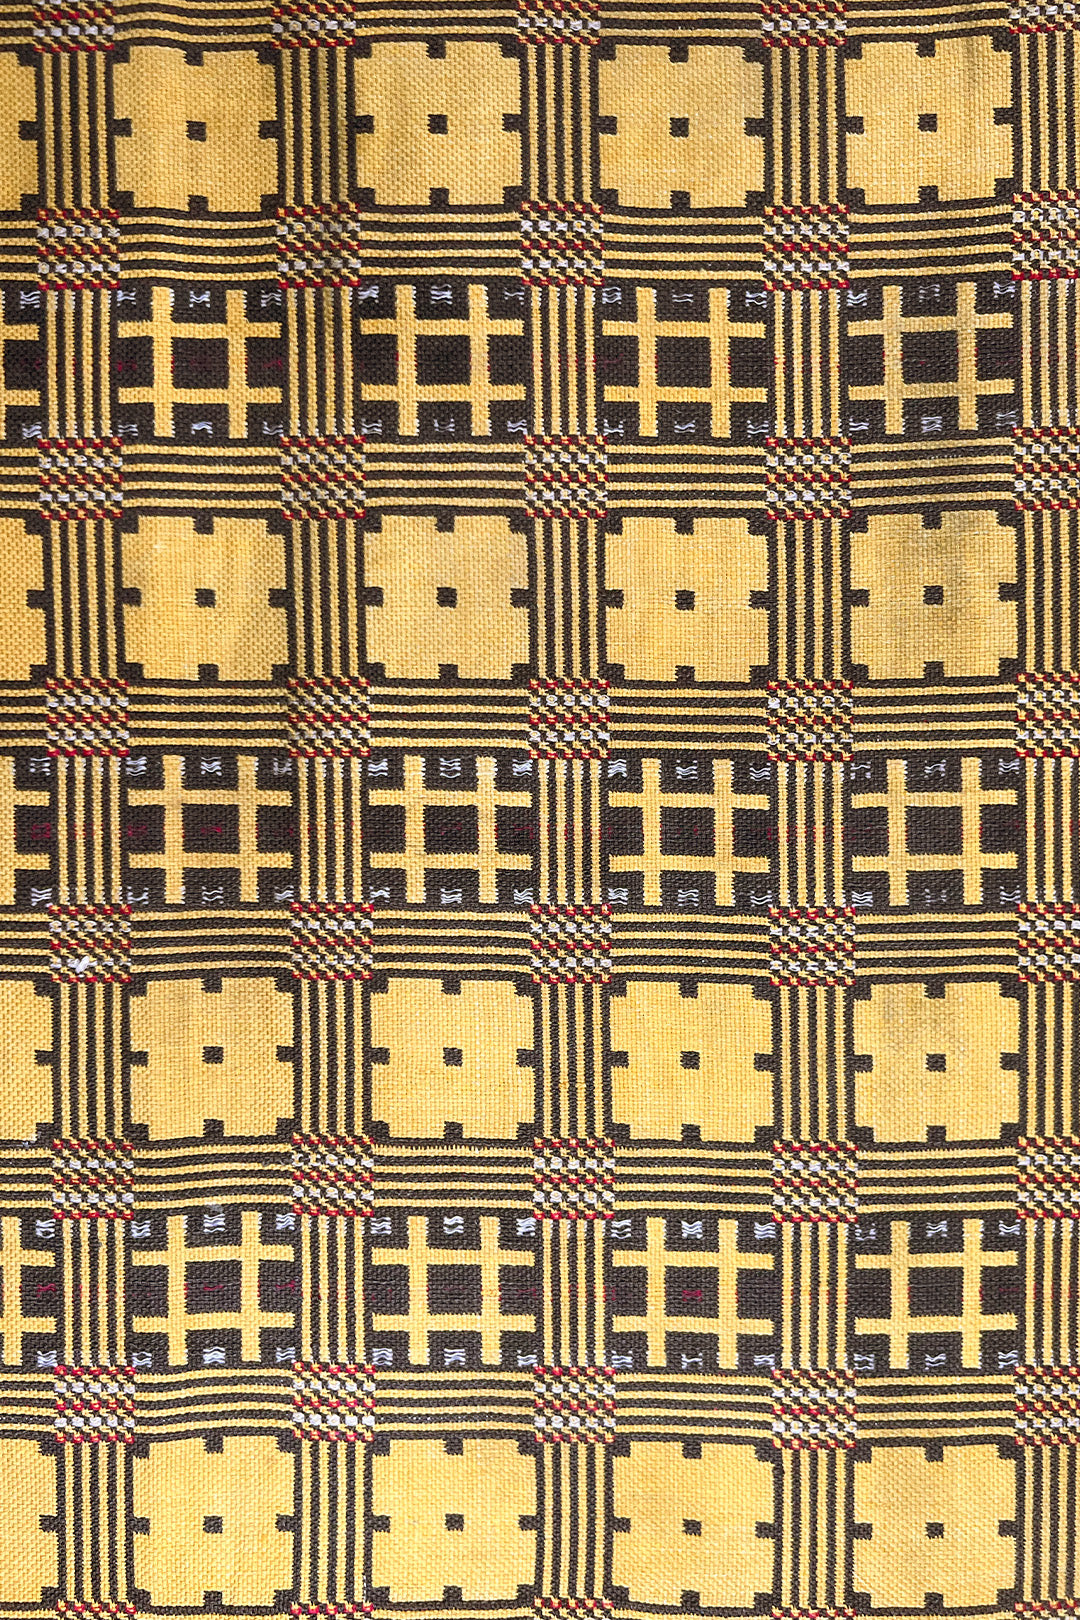 Woven Cotton Blanket (Khes)